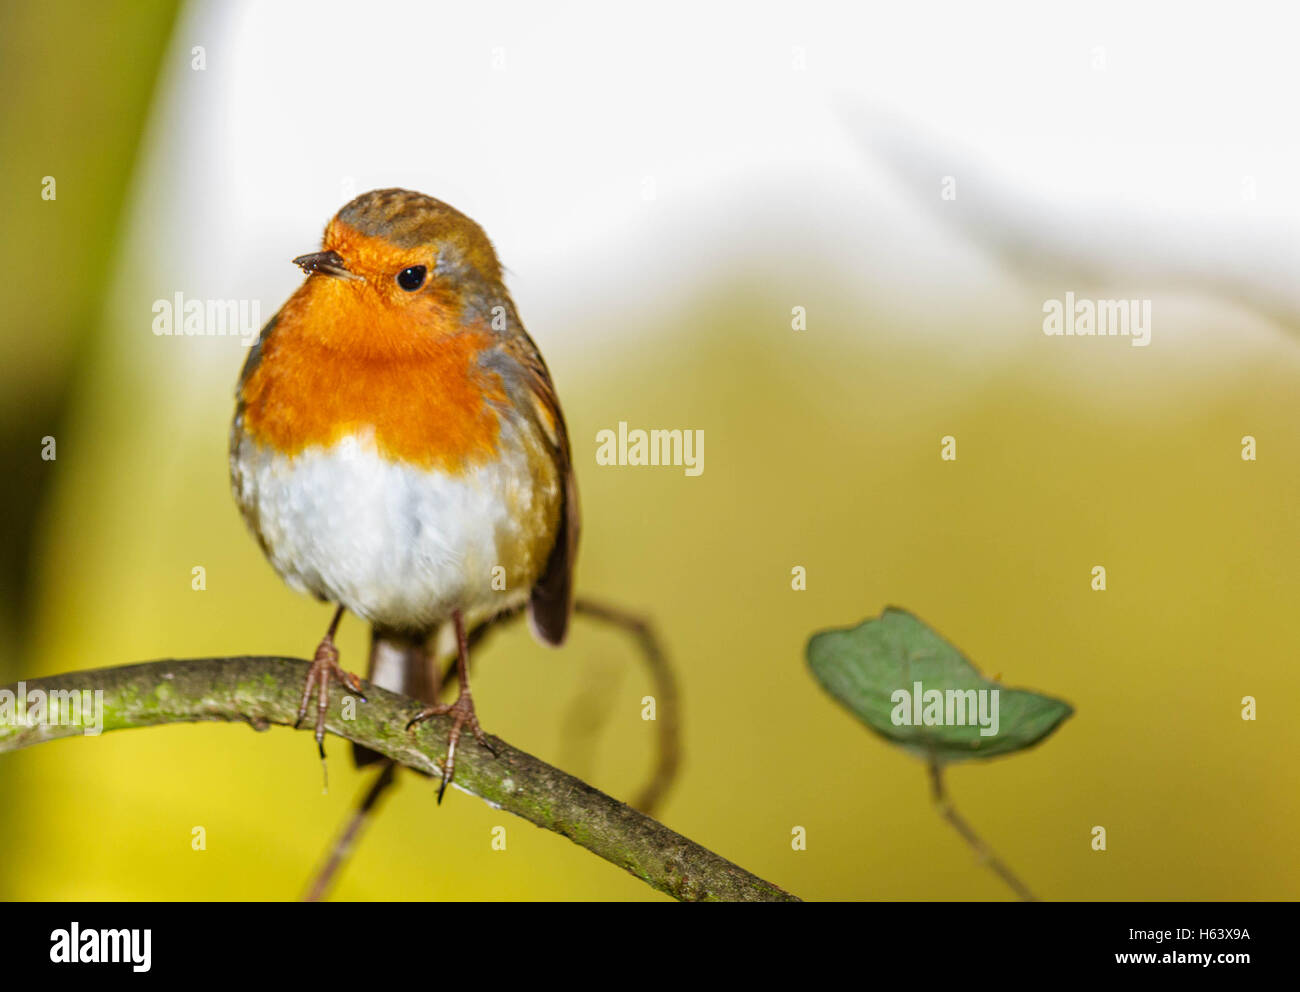 The most perfect picture for Christmas. This little Robin Red Breast seem to pose for me. Stock Photo